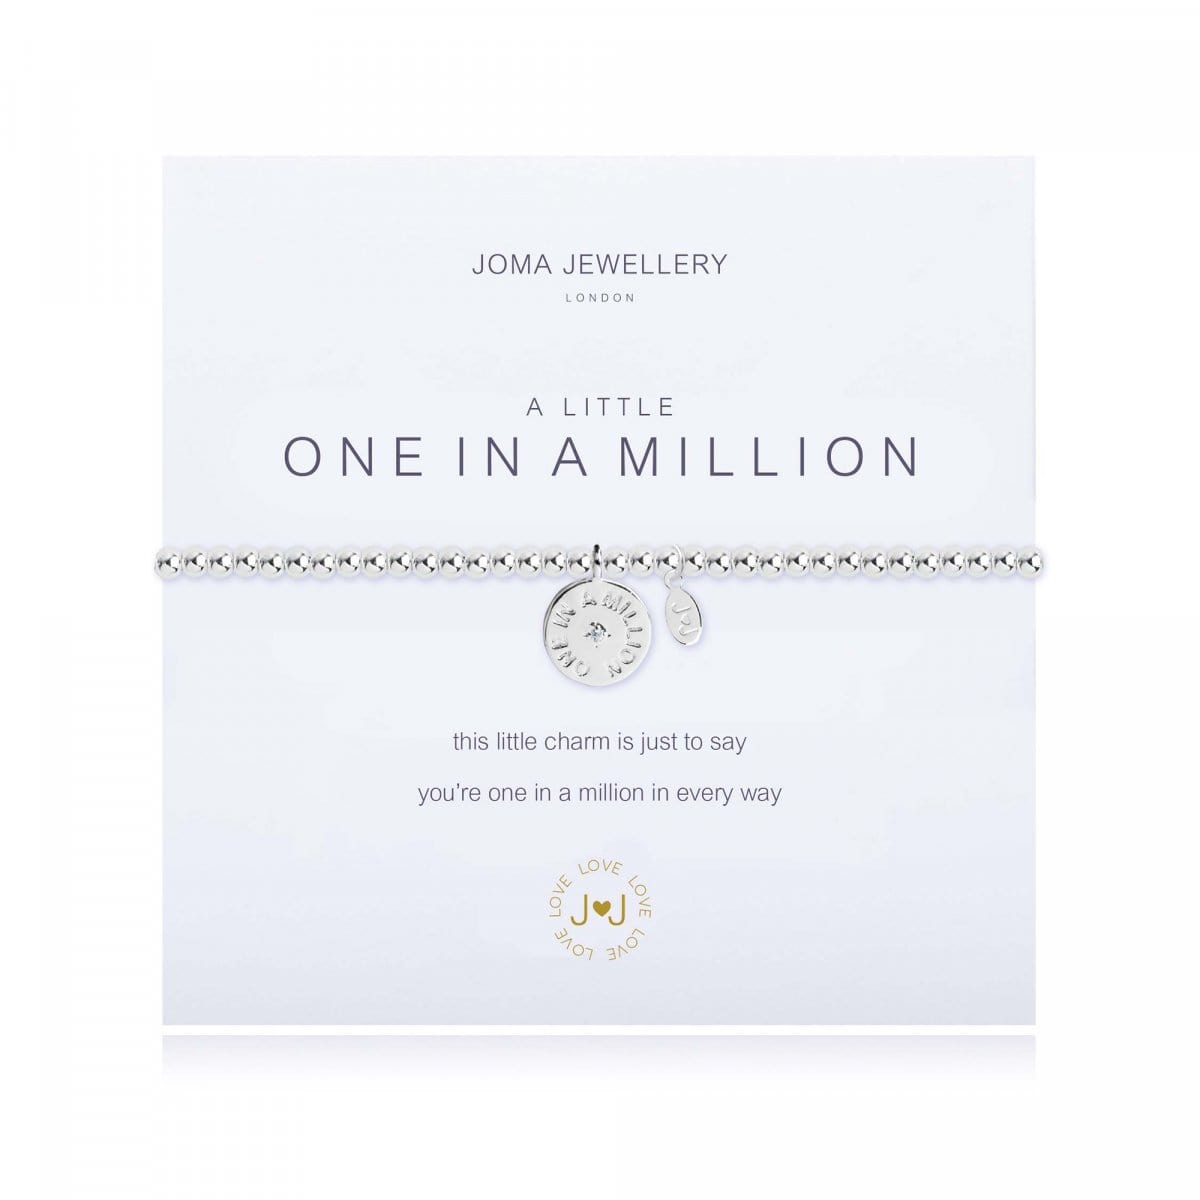 Joma Jewellery Bracelet Joma Jewellery Bracelet - a little One in a Million